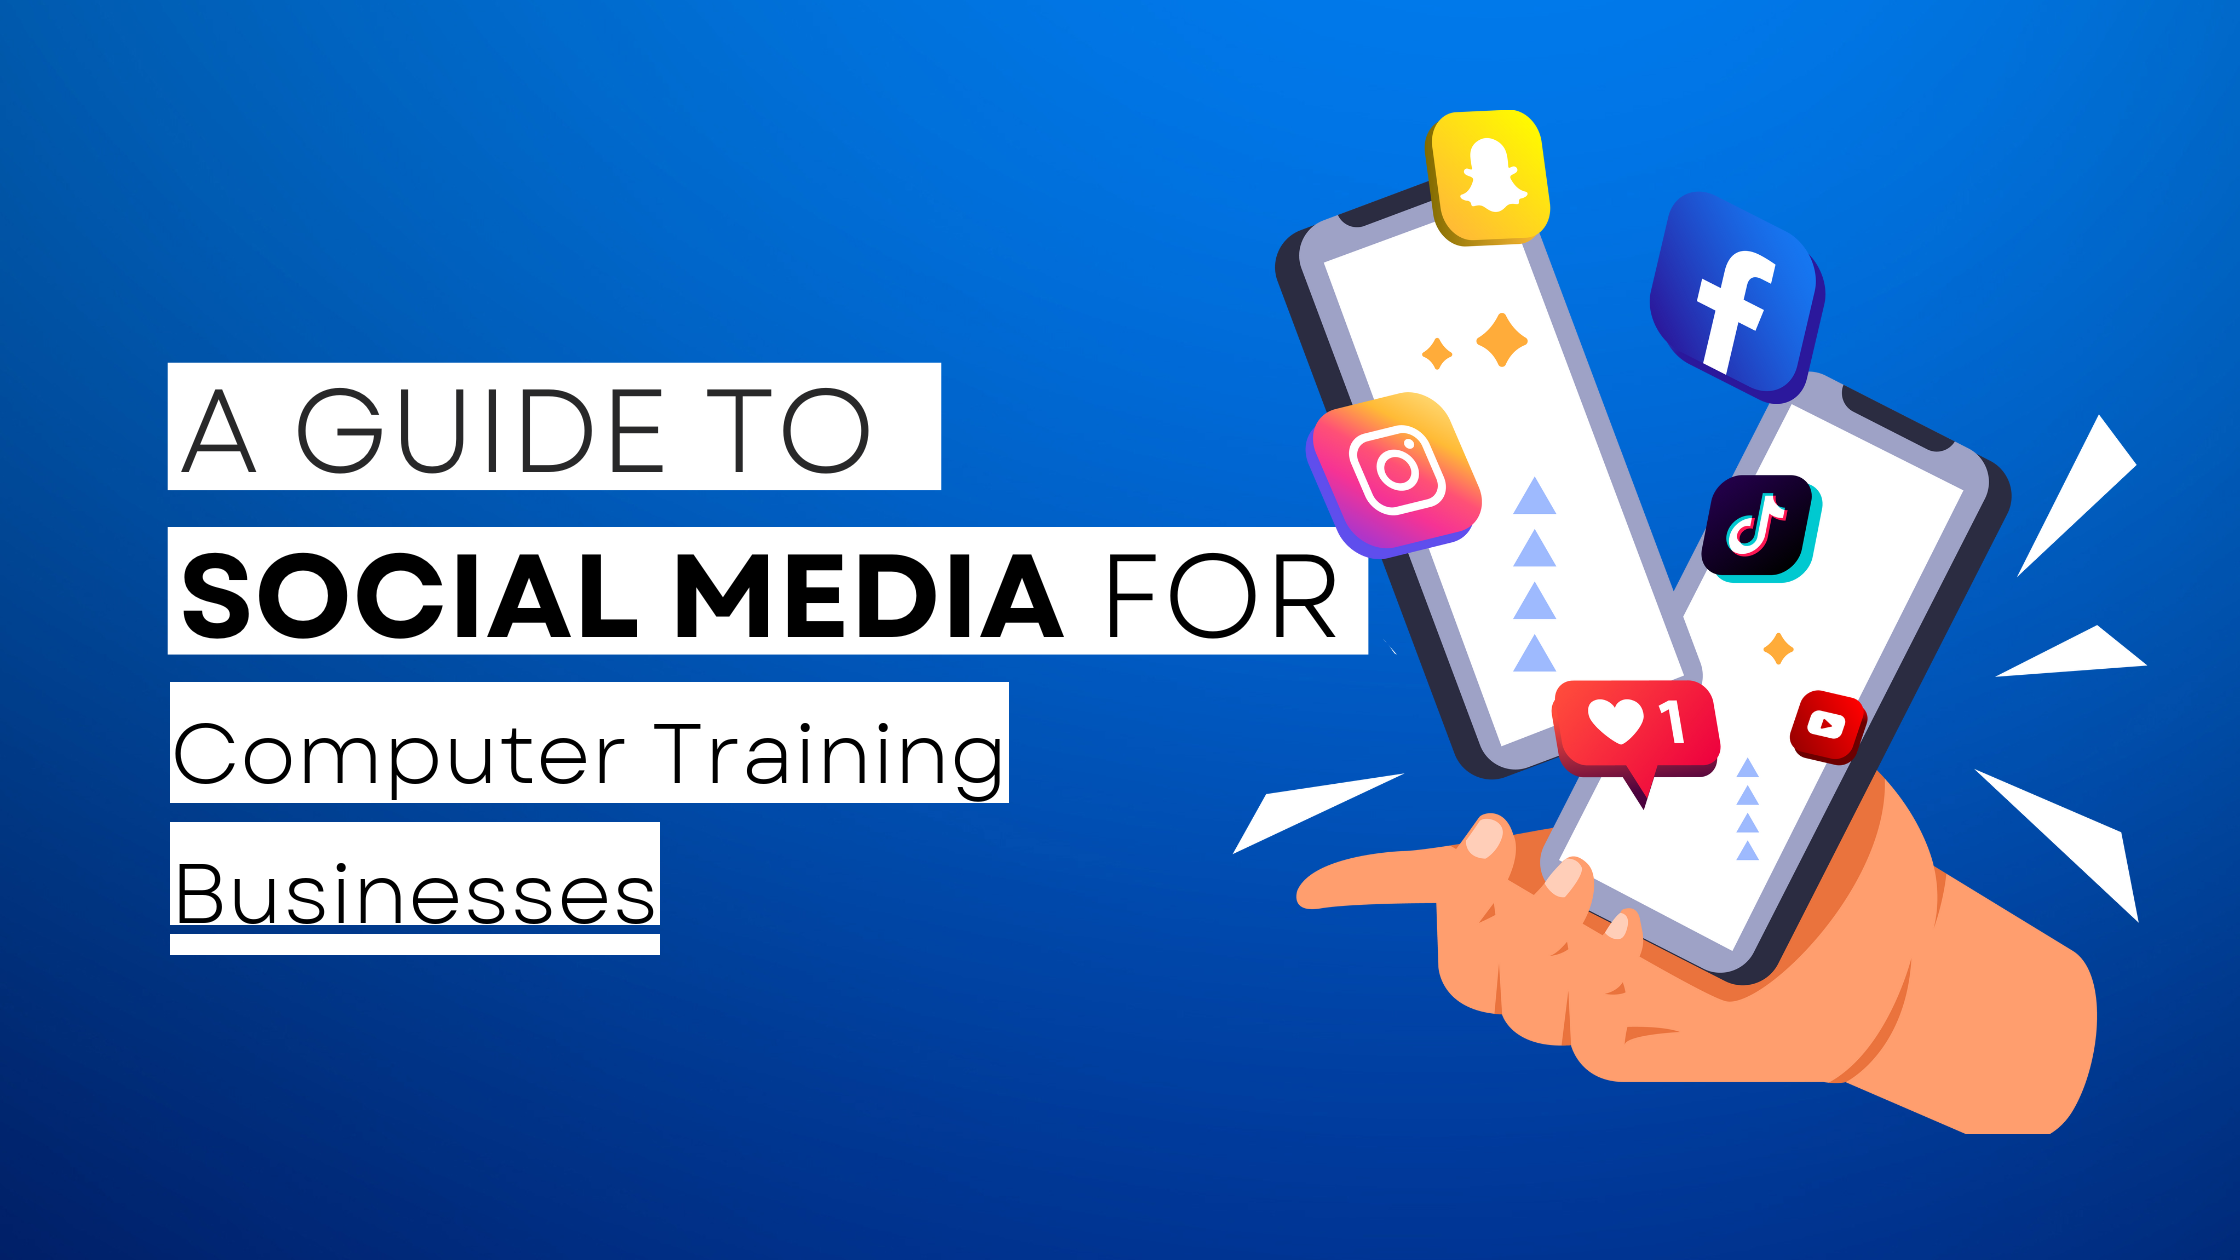 How to start Computer Training on social media